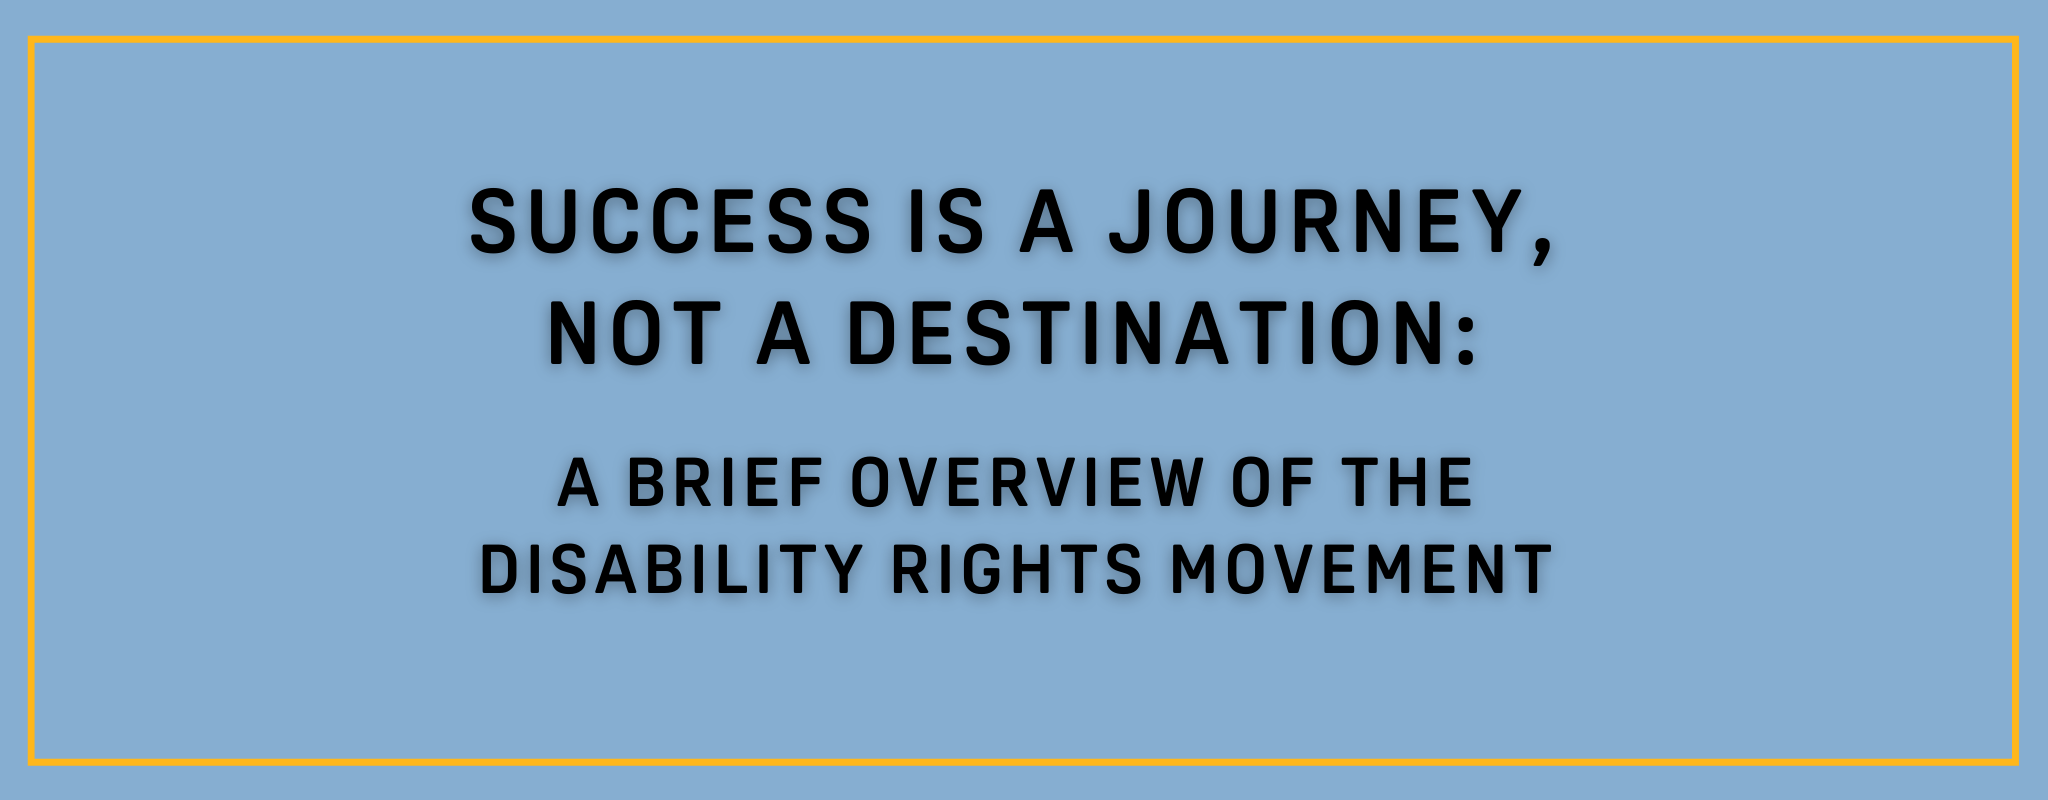 Light blue banner with text that says "Success is a journey, not a destination: A brief overview of the Disability Rights movement"